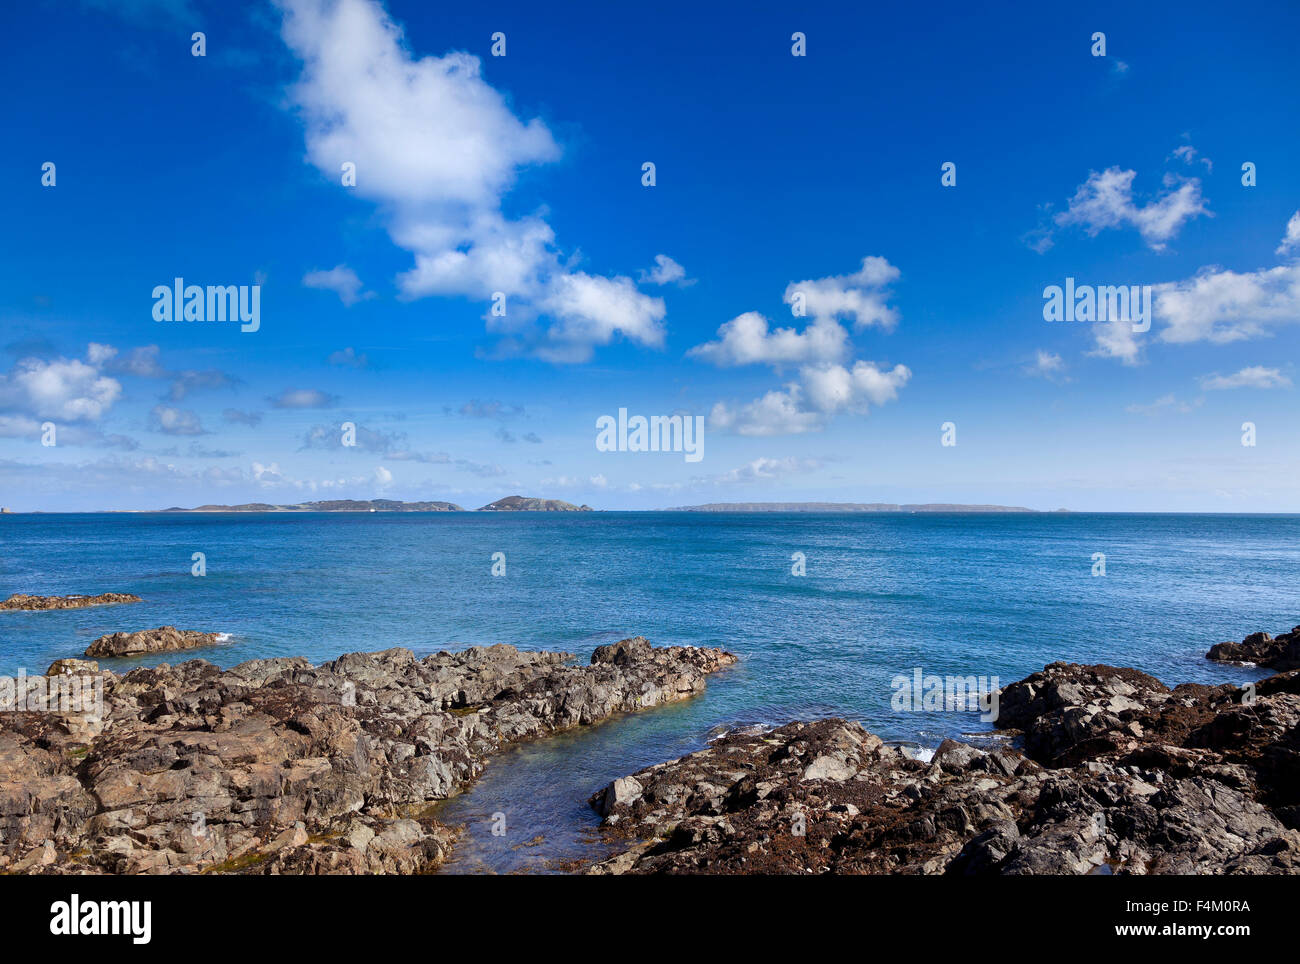 Guernsey rocky coastline, view looking East towards Herm and Sark, bright sun, blue sky Stock Photo